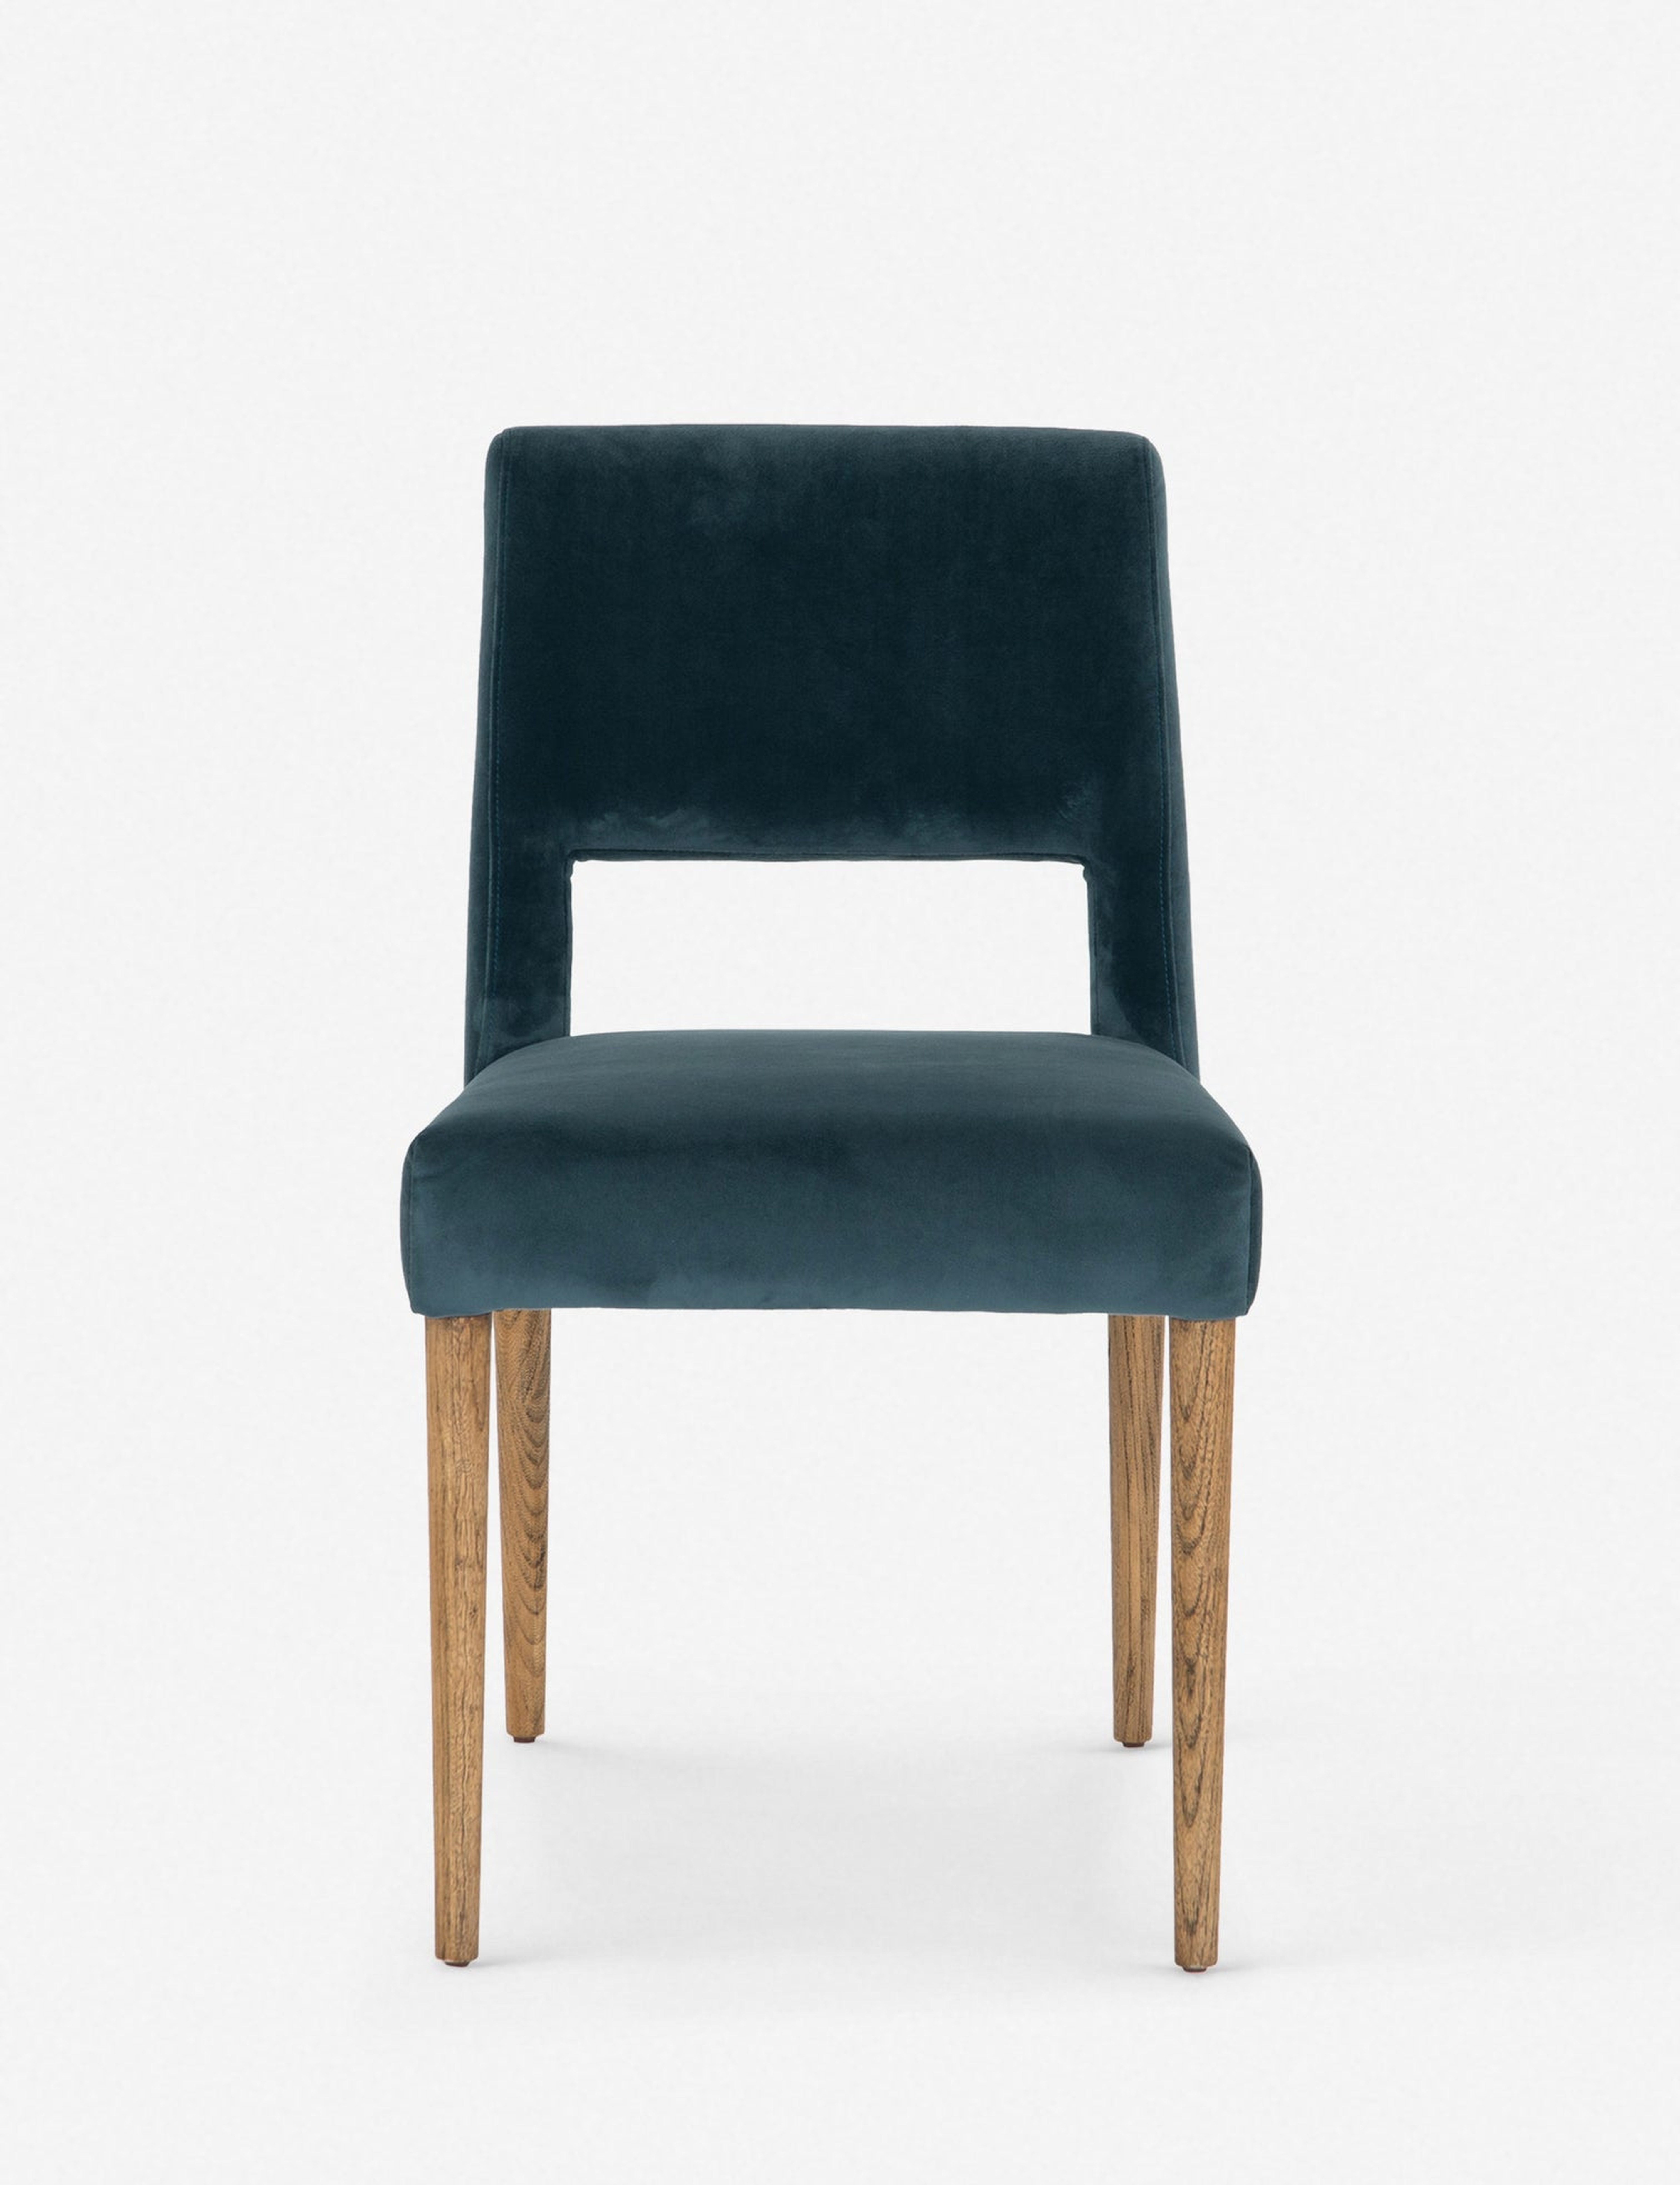 Ninette Dining Chair, Turquoise - Lulu and Georgia